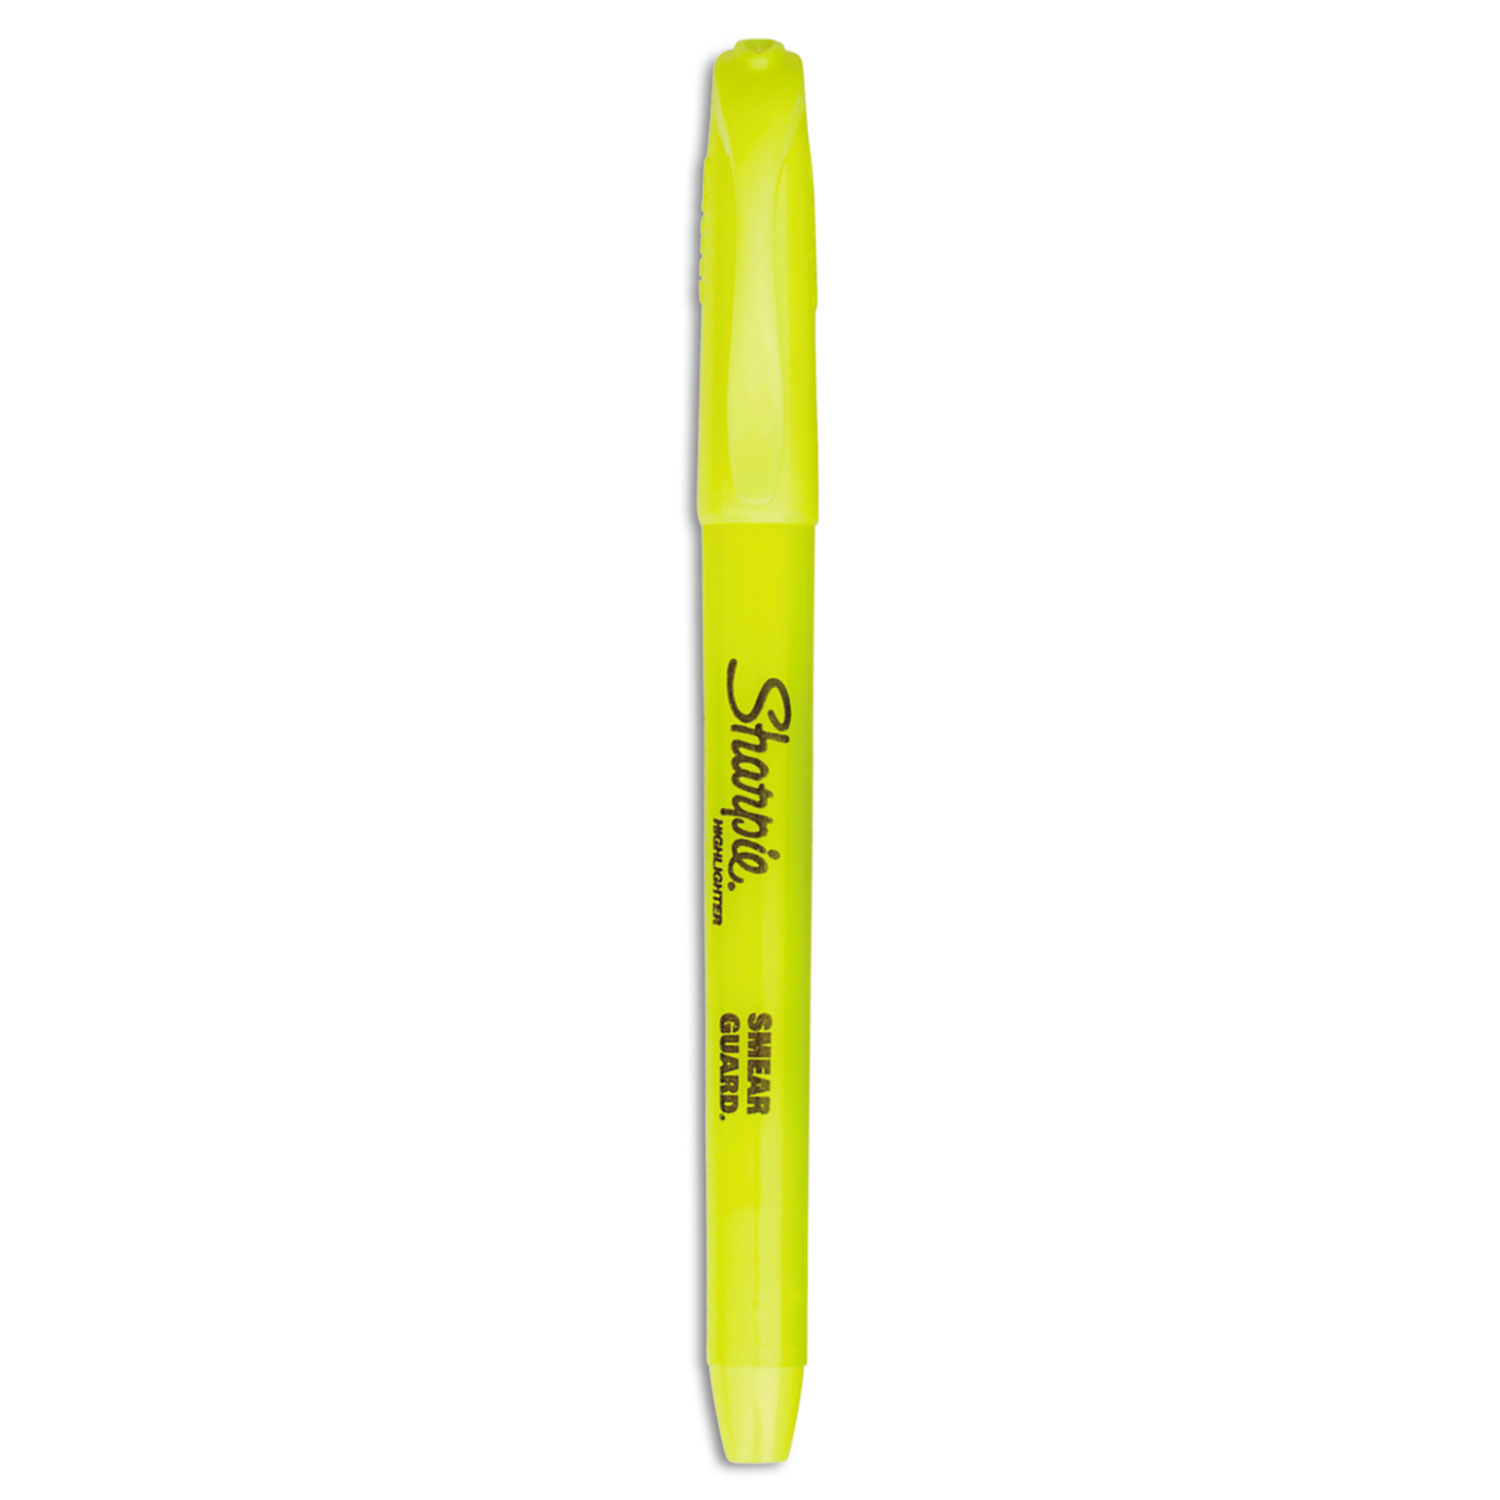 Pocket Highlighters - Office Pack, Chisel Tip, Yellow, 36 per pack